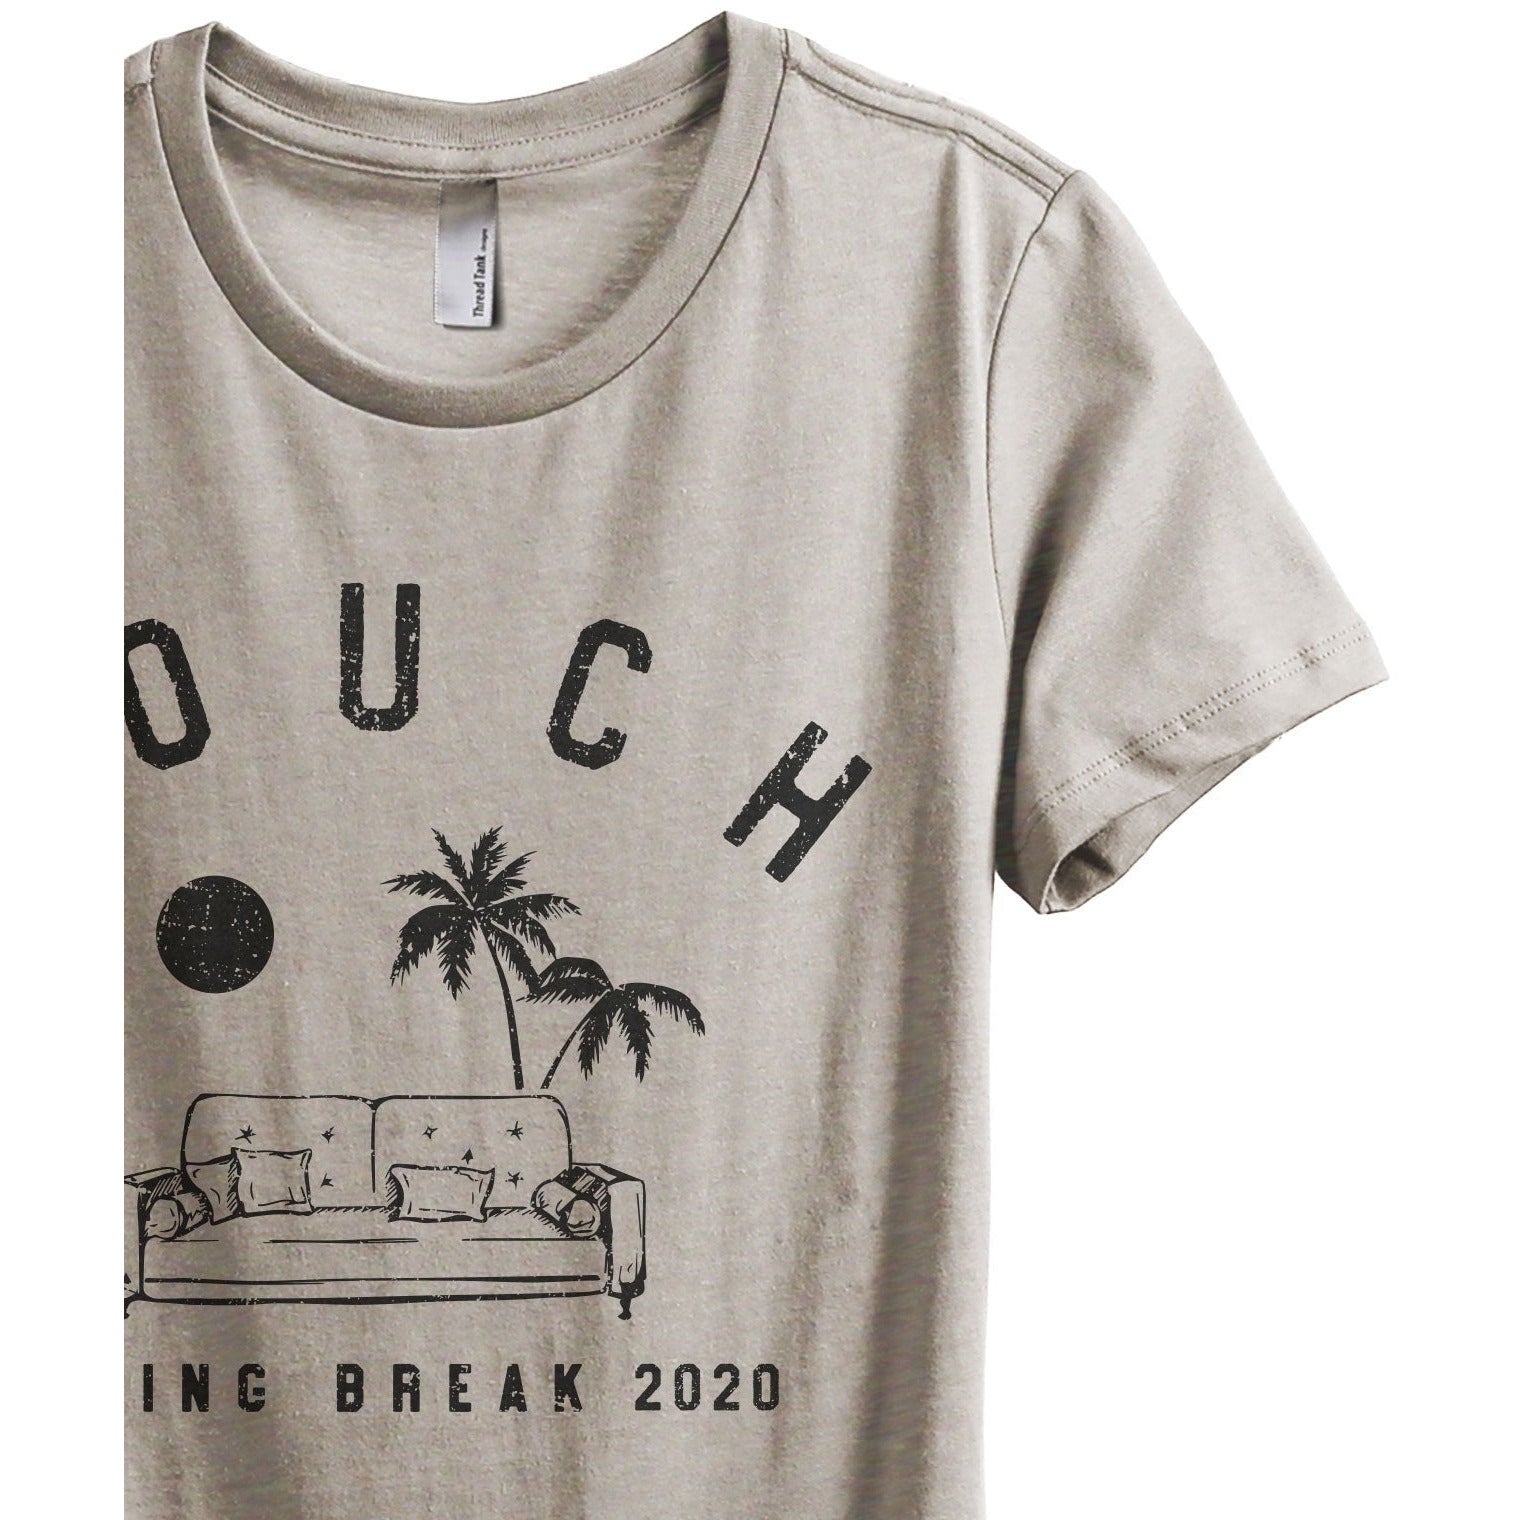 Couch Spring Break Women's Relaxed Crewneck T-Shirt Top Tee Charcoal Grey Zoom Details